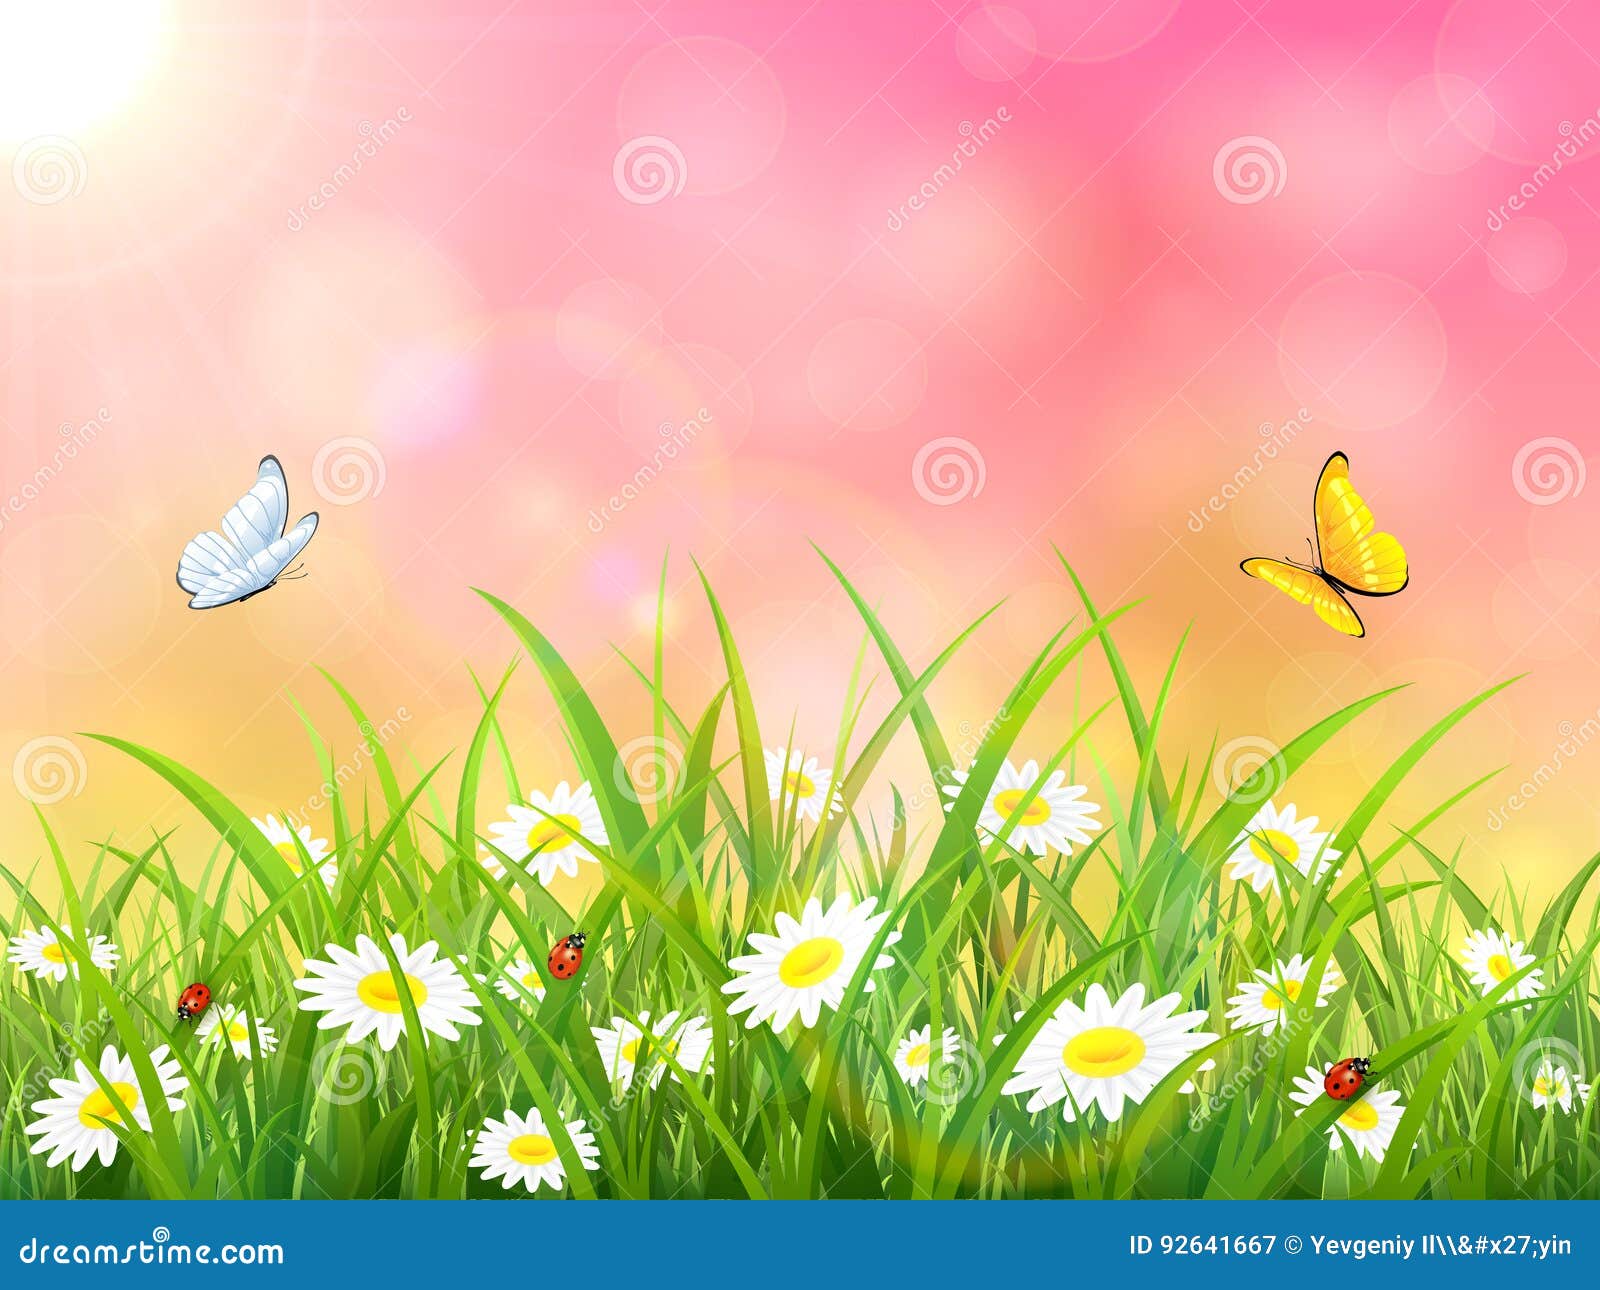 Pink Nature Background with Sun and Butterflies Stock Vector - Illustration  of morning, idyllic: 92641667